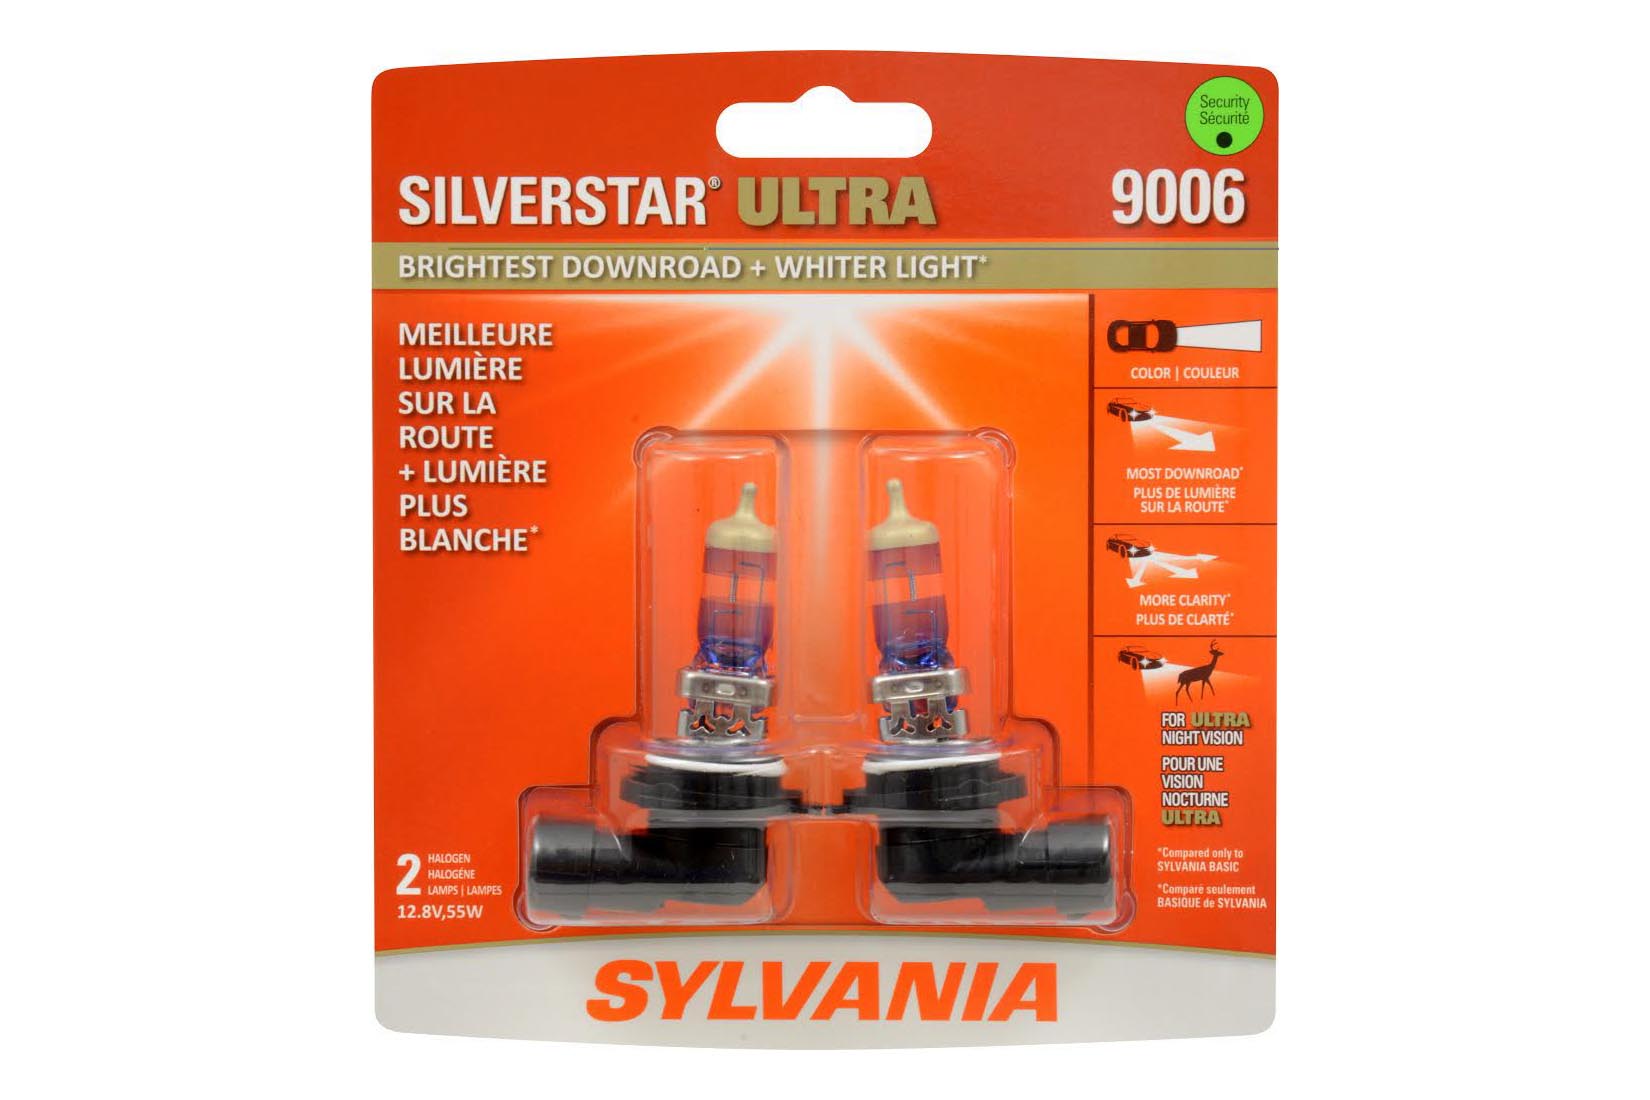 Here’s a set of upgraded Sylvania halogen bulbs. As most factory halogen bulbs are built to a price-point and little else, companies like Sylvania have capitalized on the demand for improved lighting performance without extensive lighting system modification. A quality set of drop-in bulbs like these should improve lighting colour and saturation in most rides.